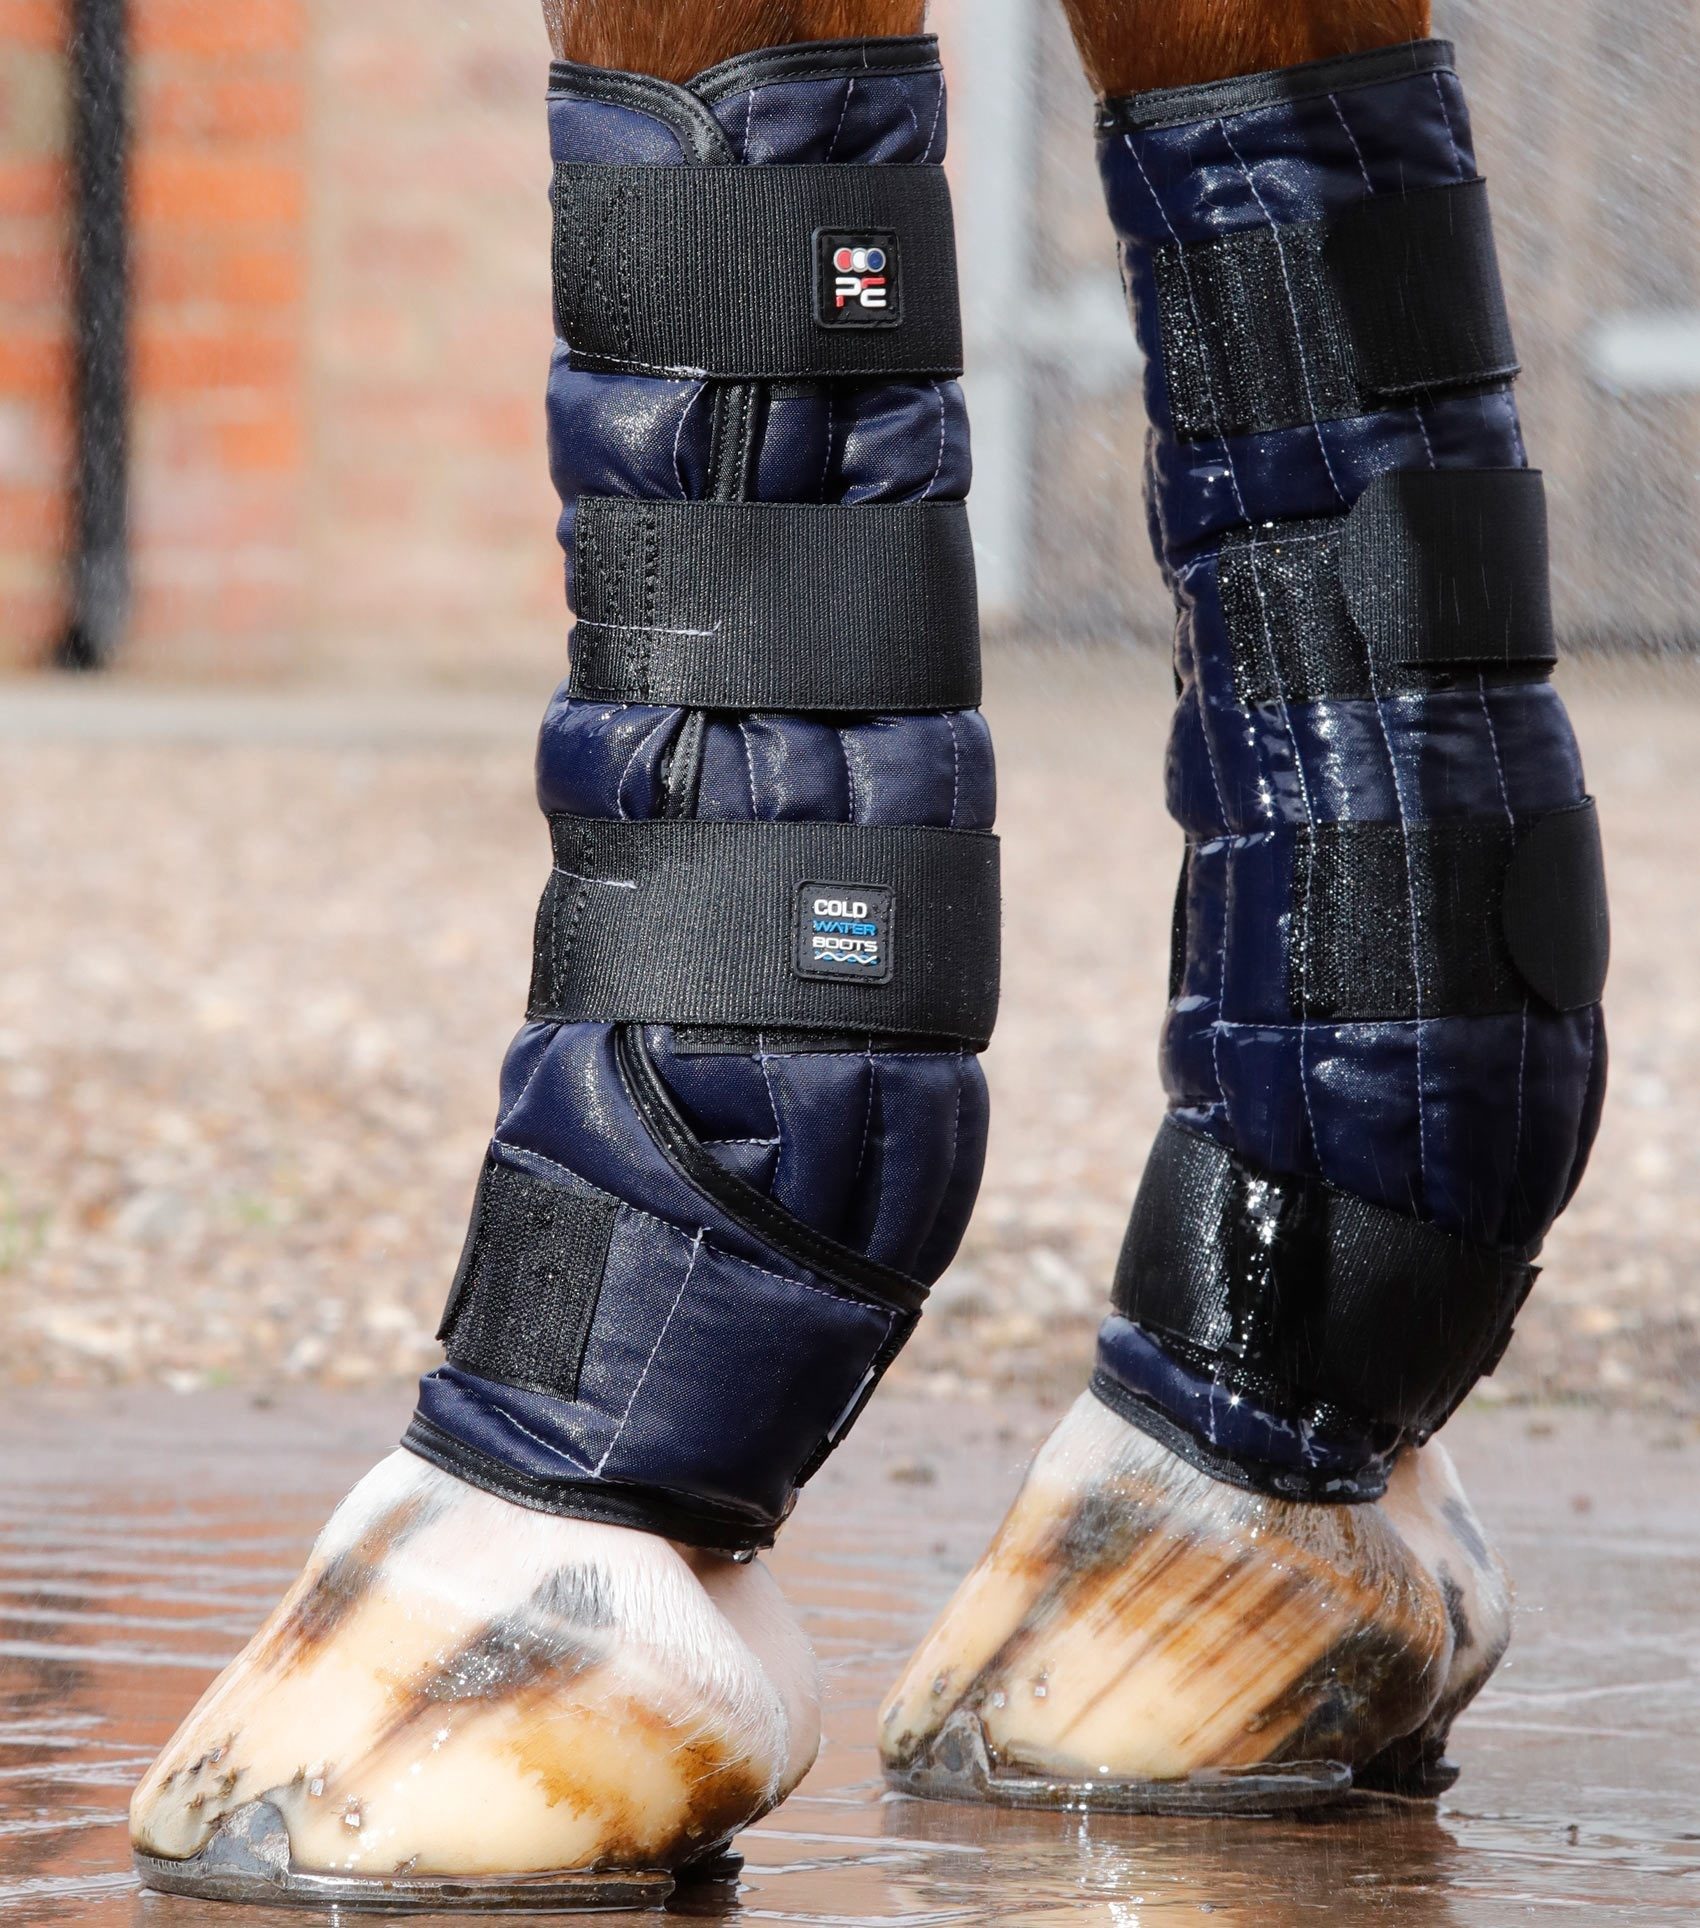 P.E COLD WATER BOOTS